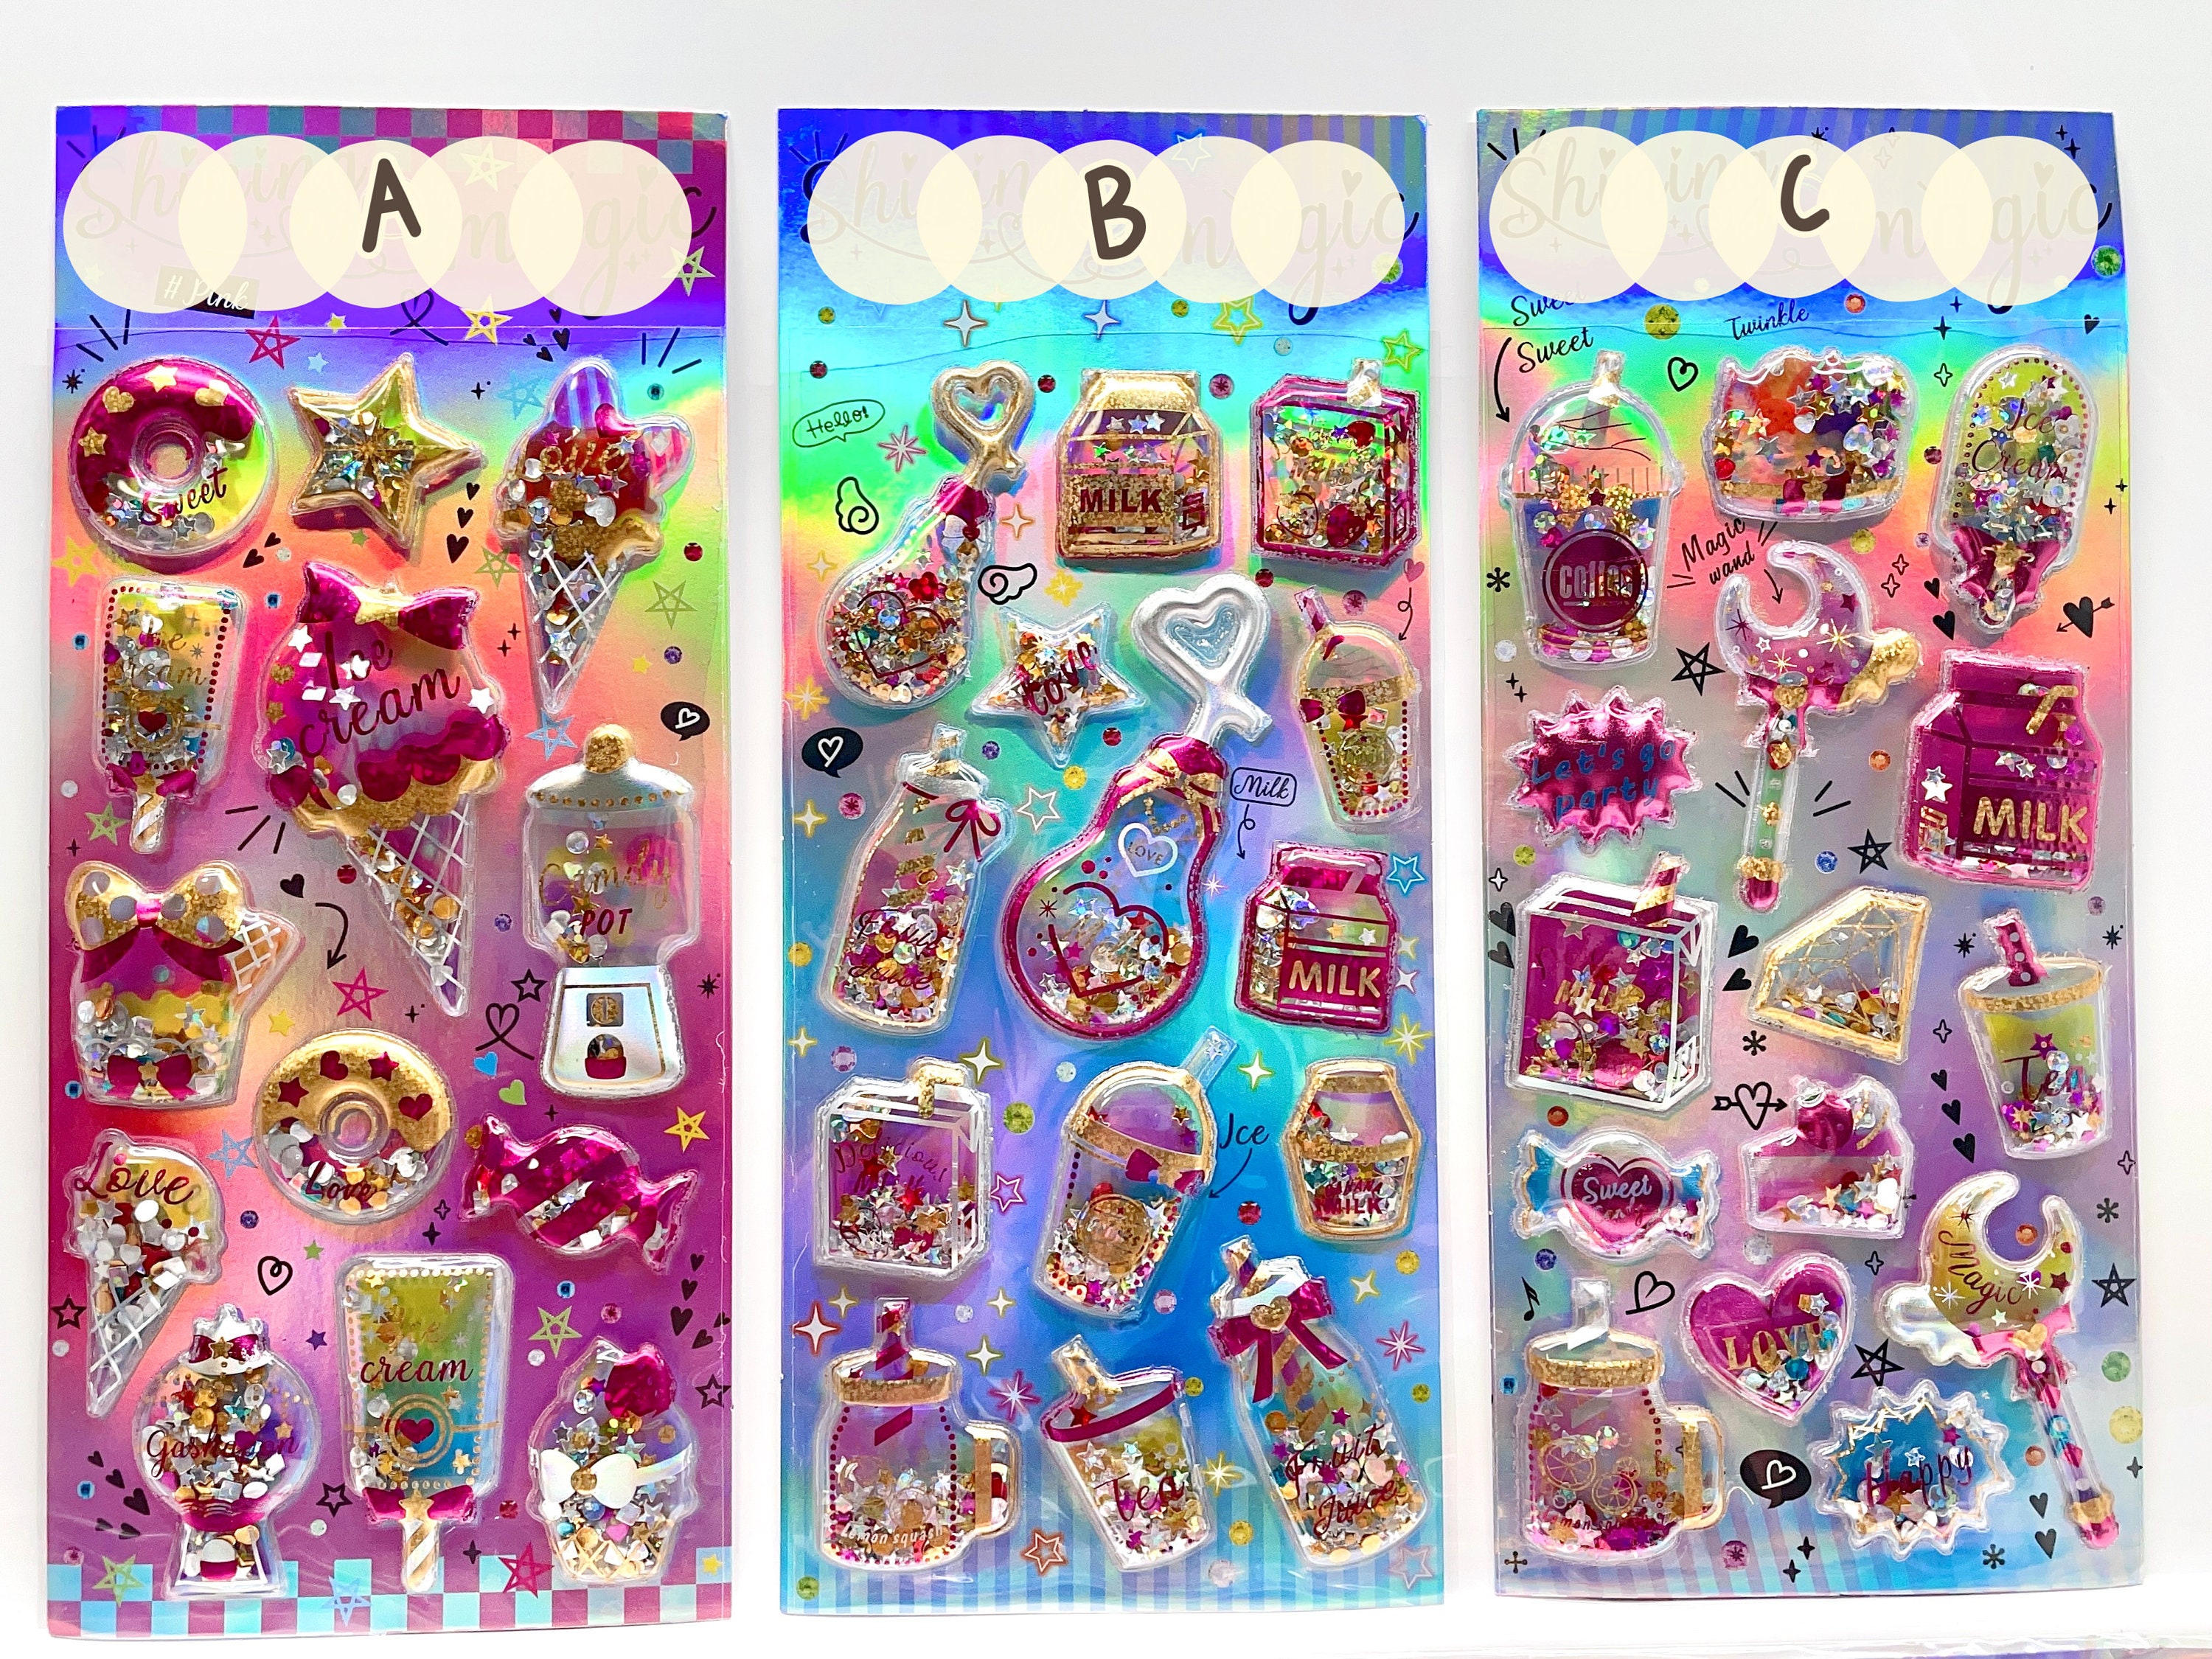 Ultimate Puffy 3D Glittery Shaker stickers grab bags!